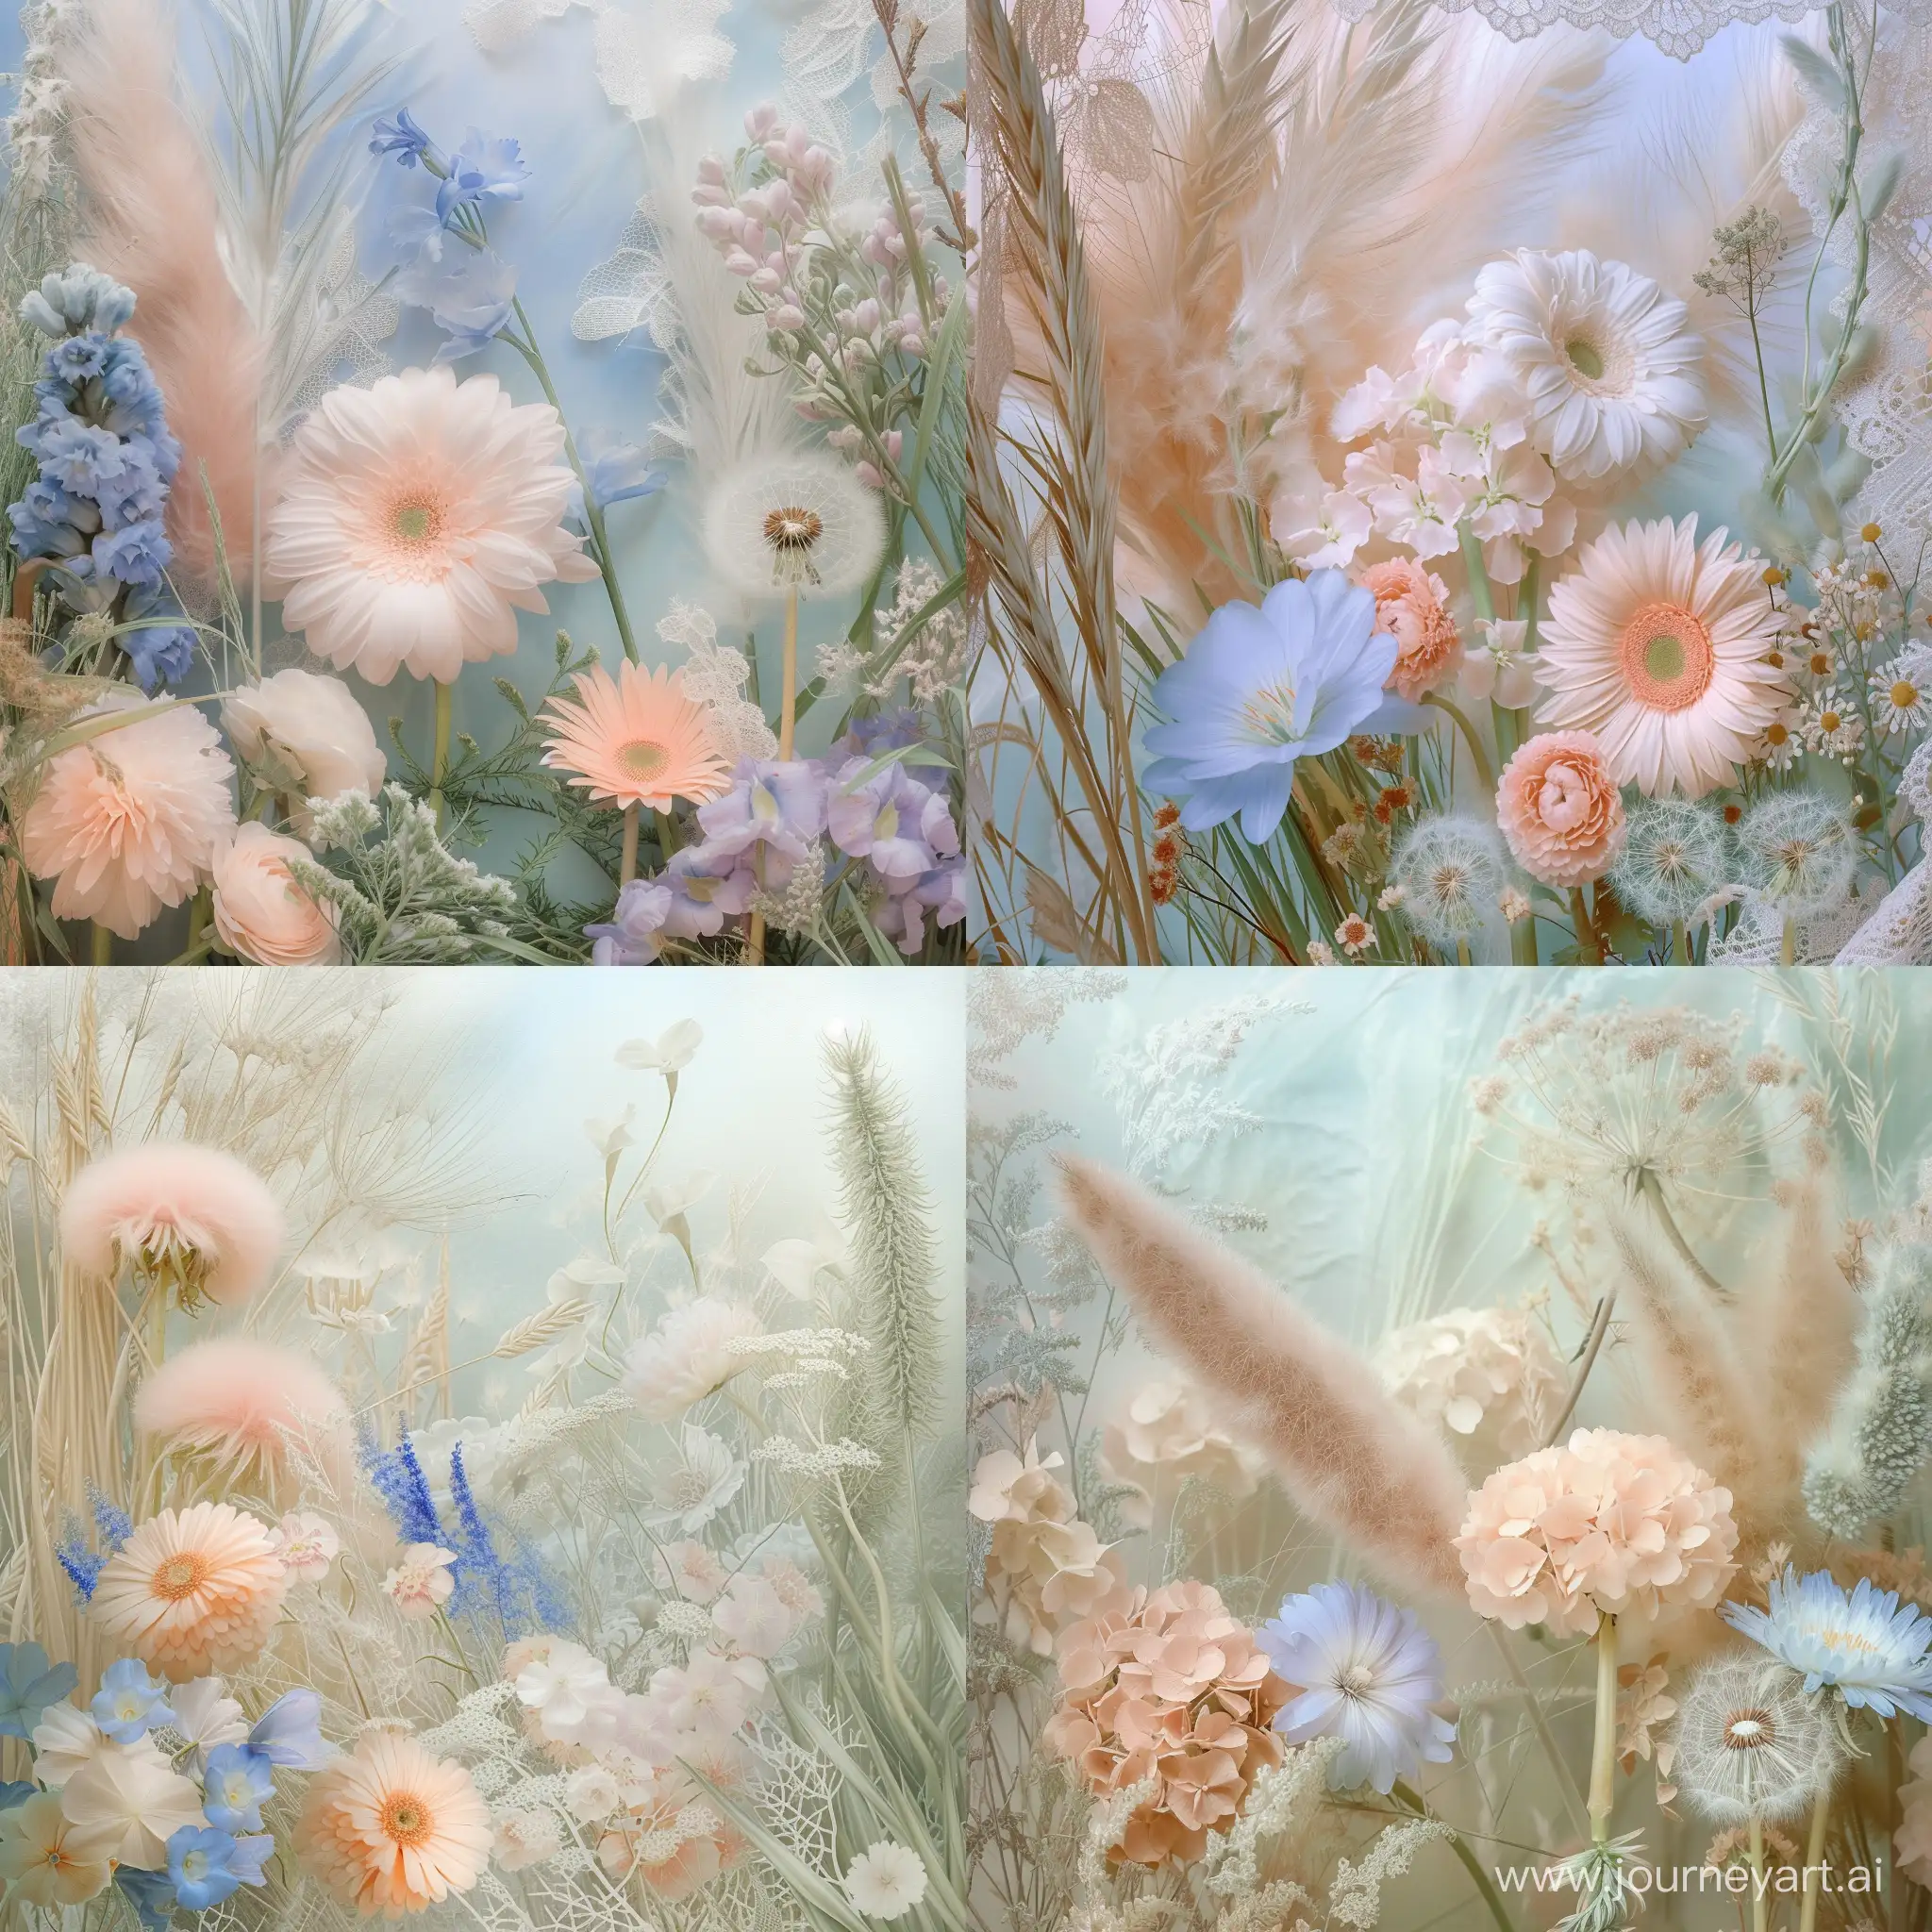 The same effect in the Masterpiece: Delicate floral composition spring, fur, reed, feather grass, delicate cotton, beautiful flowers, delicate pastel, lilac, blue, pink, pale green, delicate garden flowers, mist flower, gerbera, lilac dandelion, white dandelion, high detail, high resolution, pixel processing with high resolution, peach pastel is the most delicate colors beautifully, harmoniously combined with lace moireJesus in the Garden of Eden --v 6 --ar 1:1 --no 43545